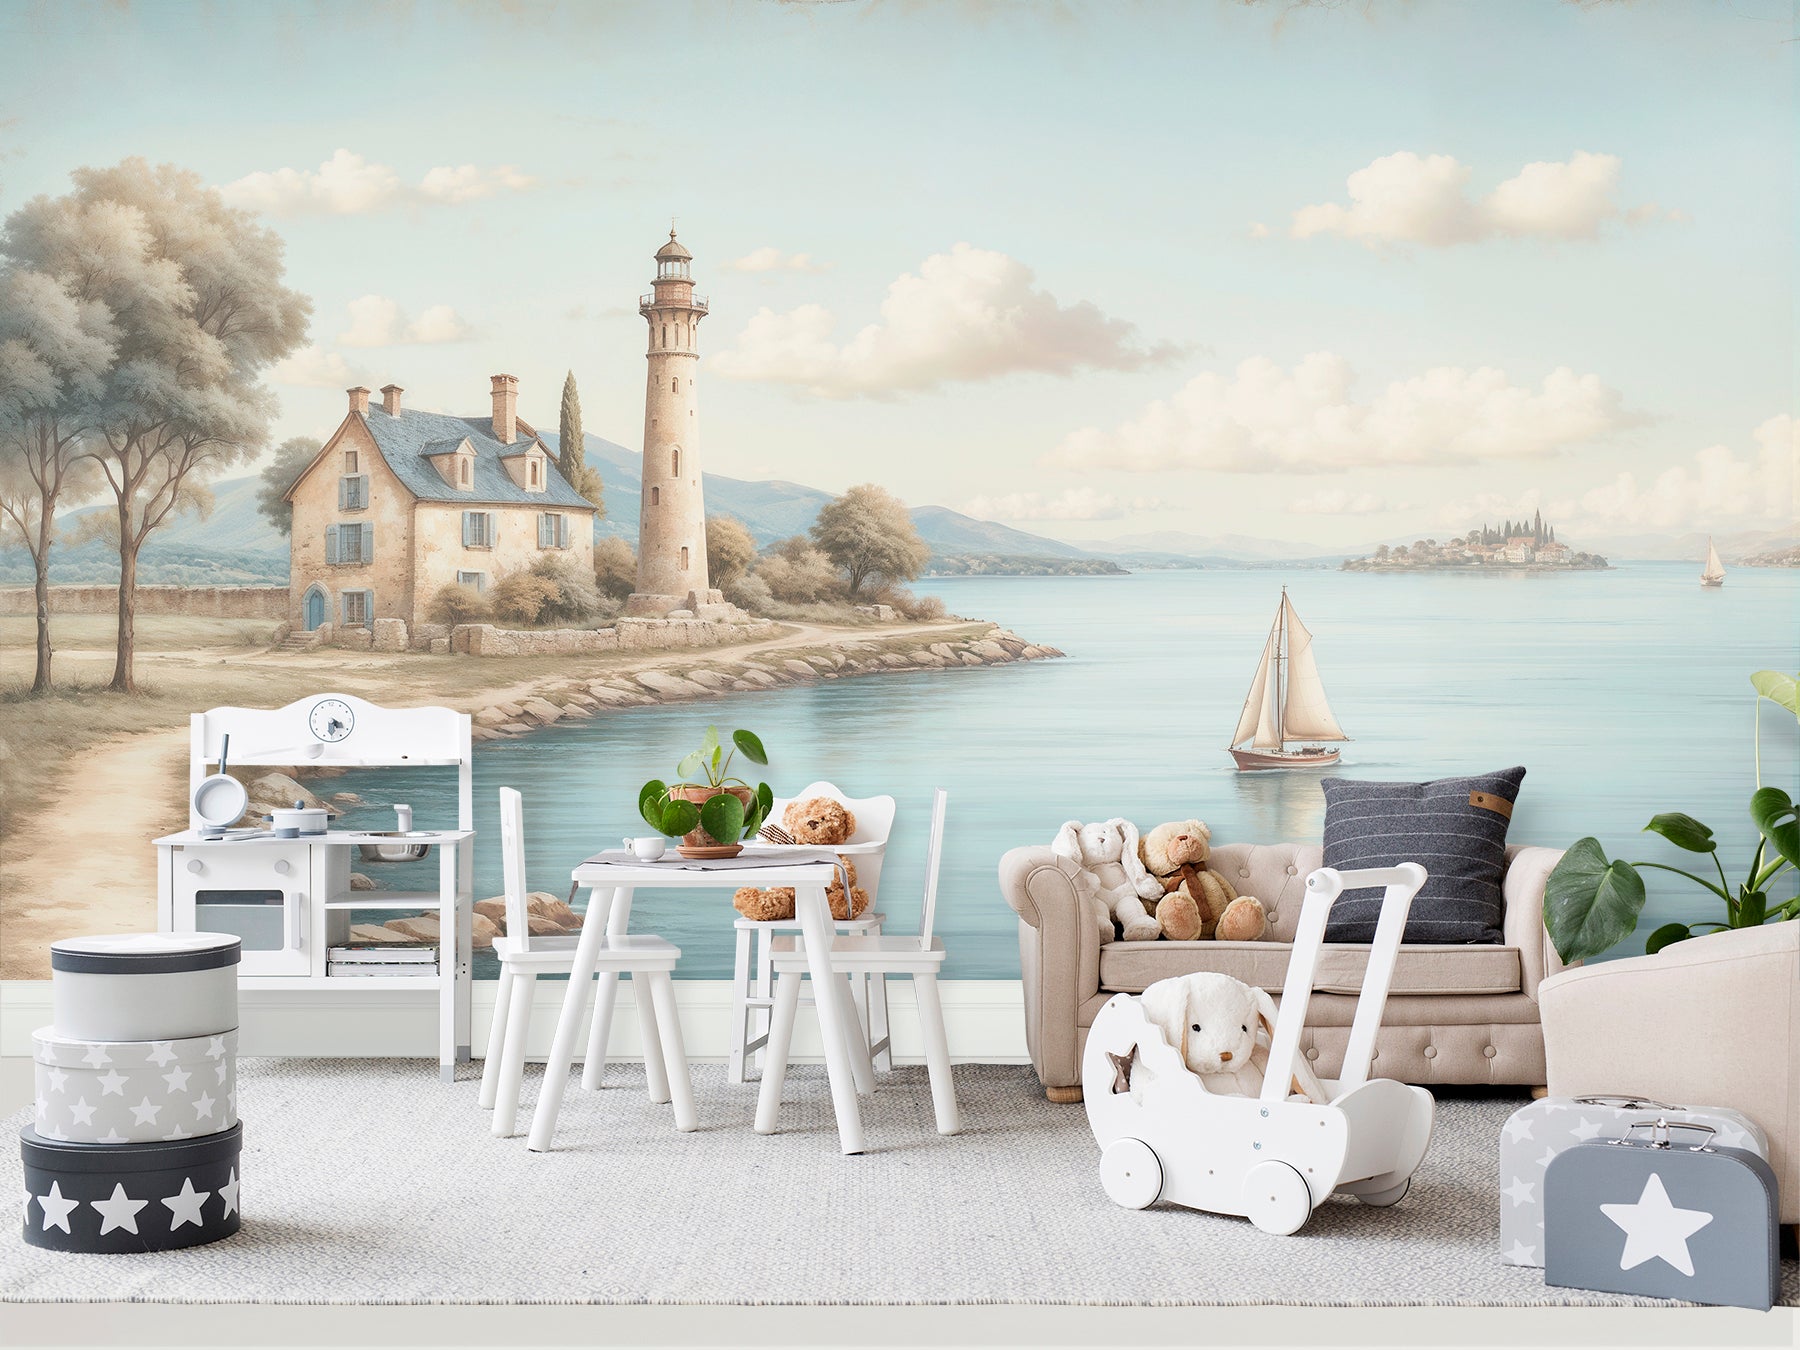 "Children's room decorated with 'A Land Far Away' mural, showcasing a picturesque lighthouse landscape."